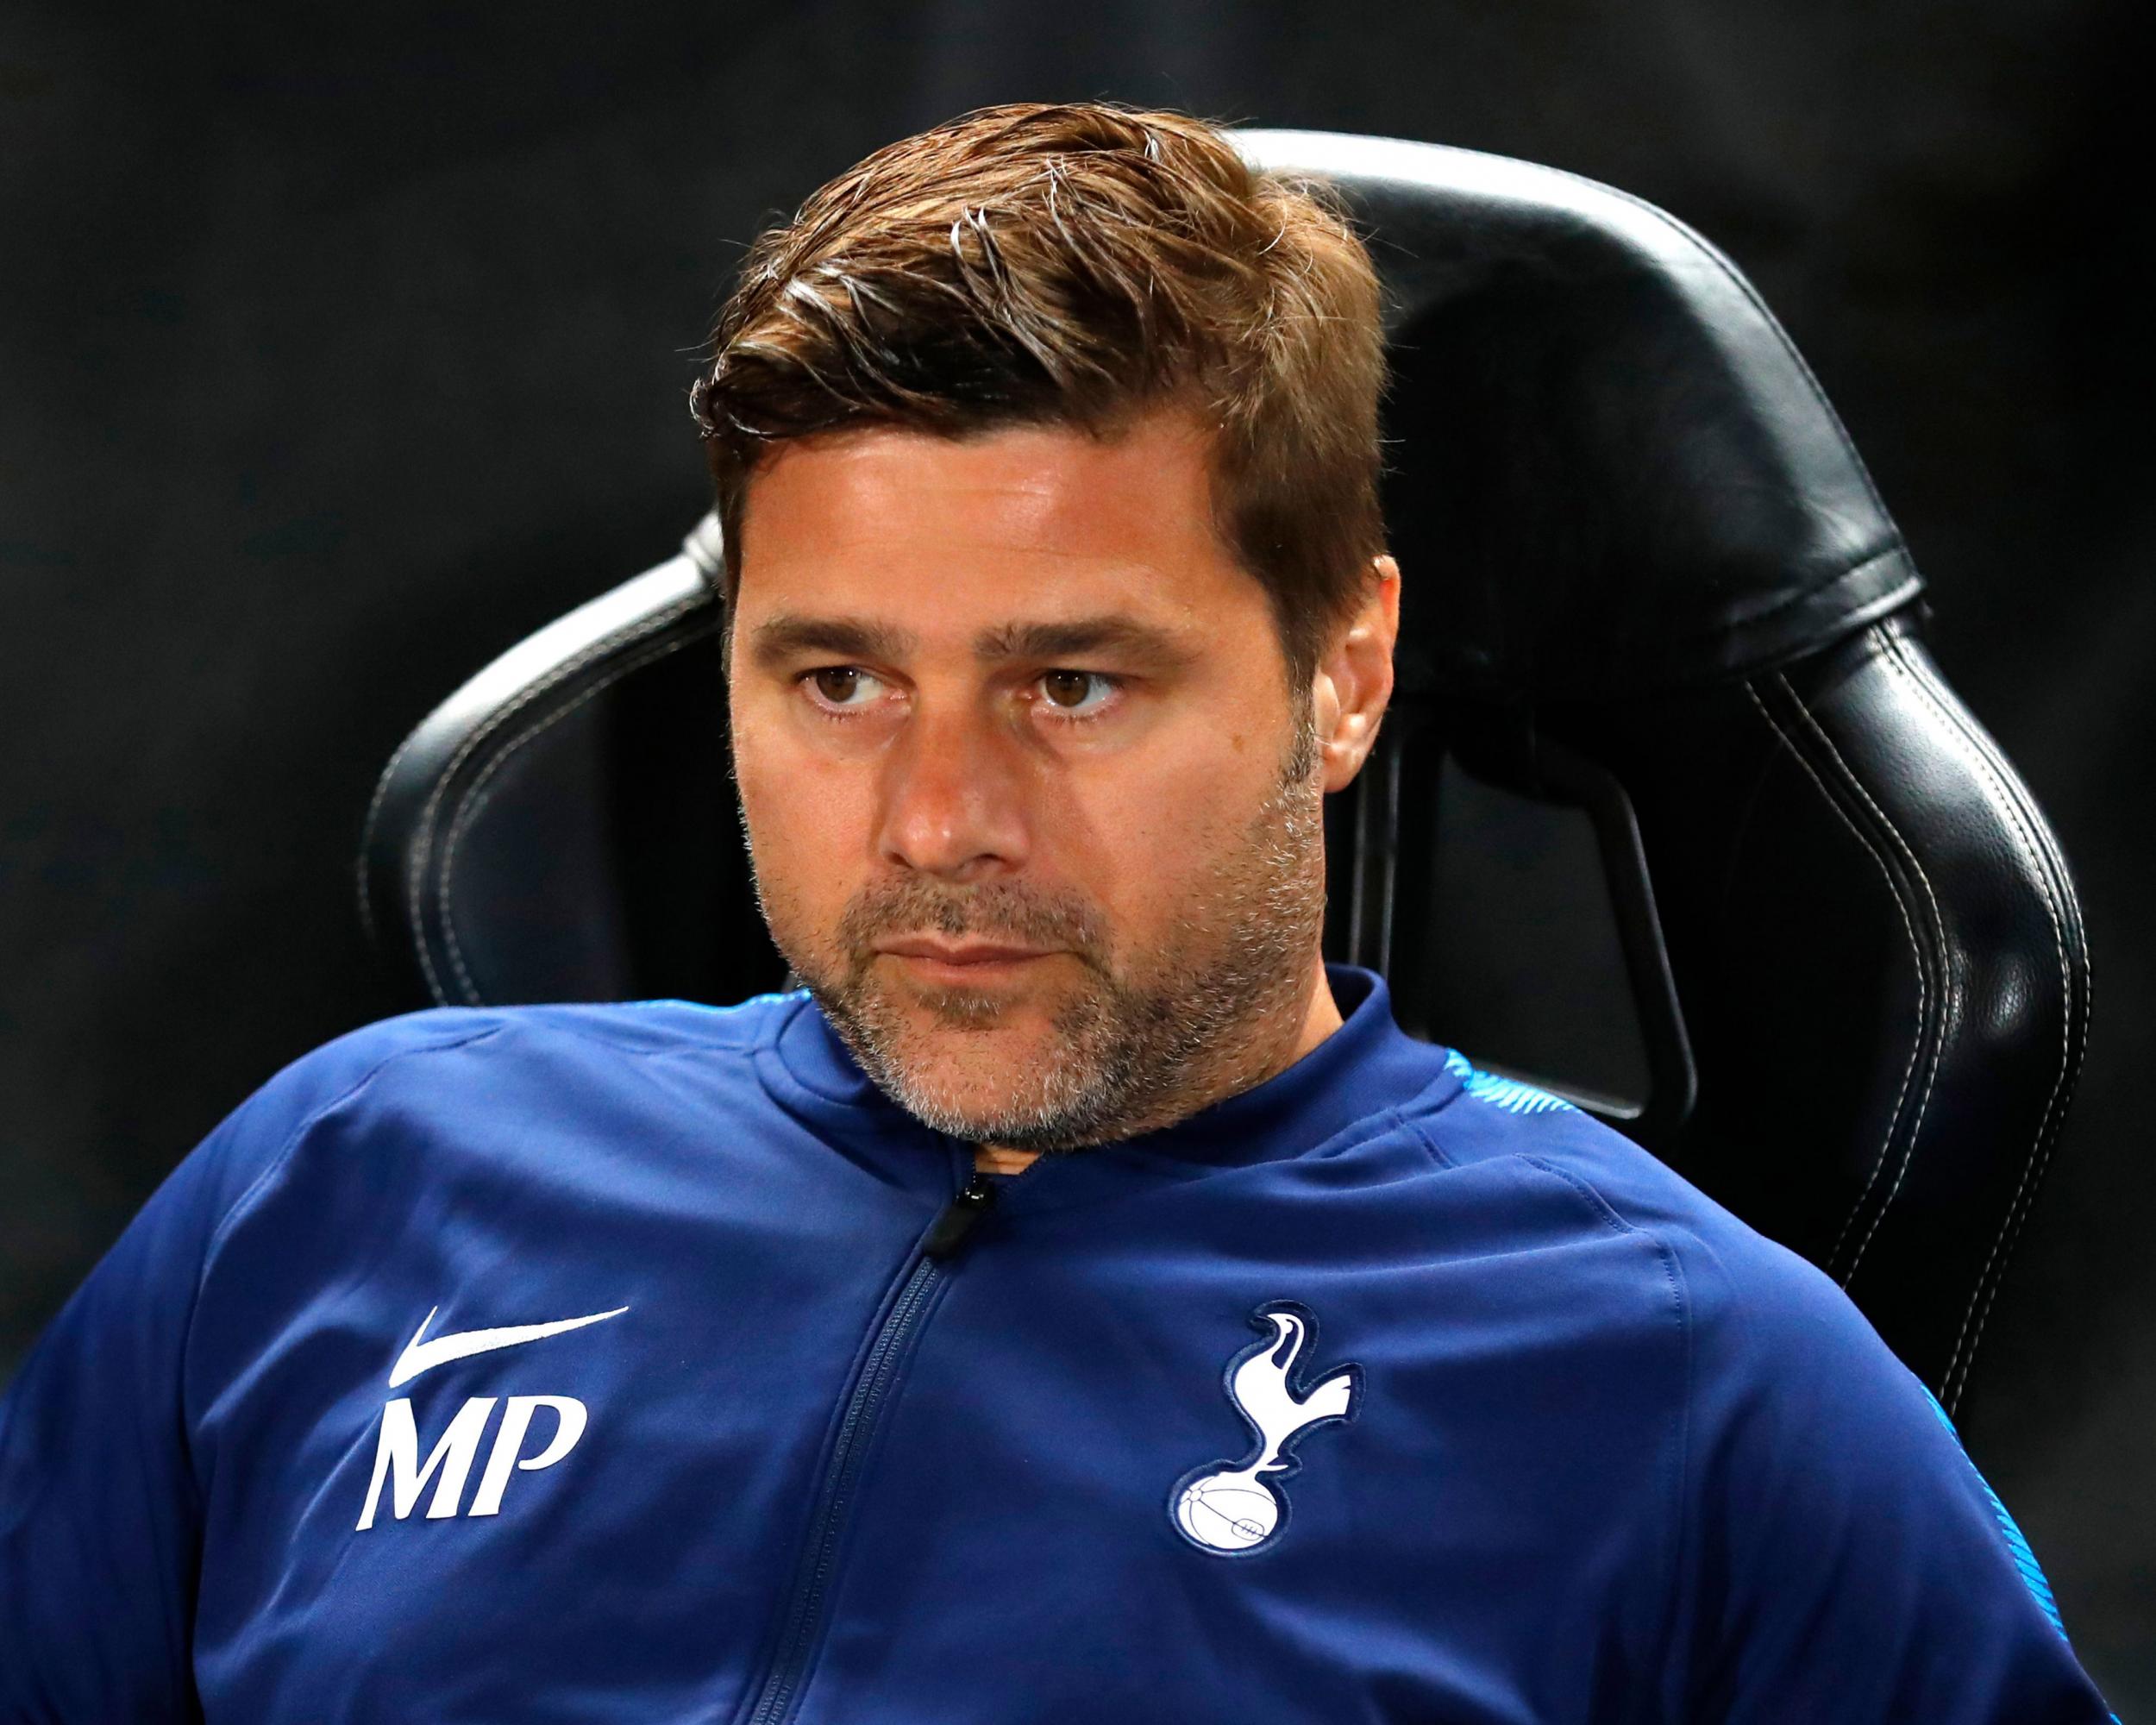 Pochettino is comfortable mixing up formations